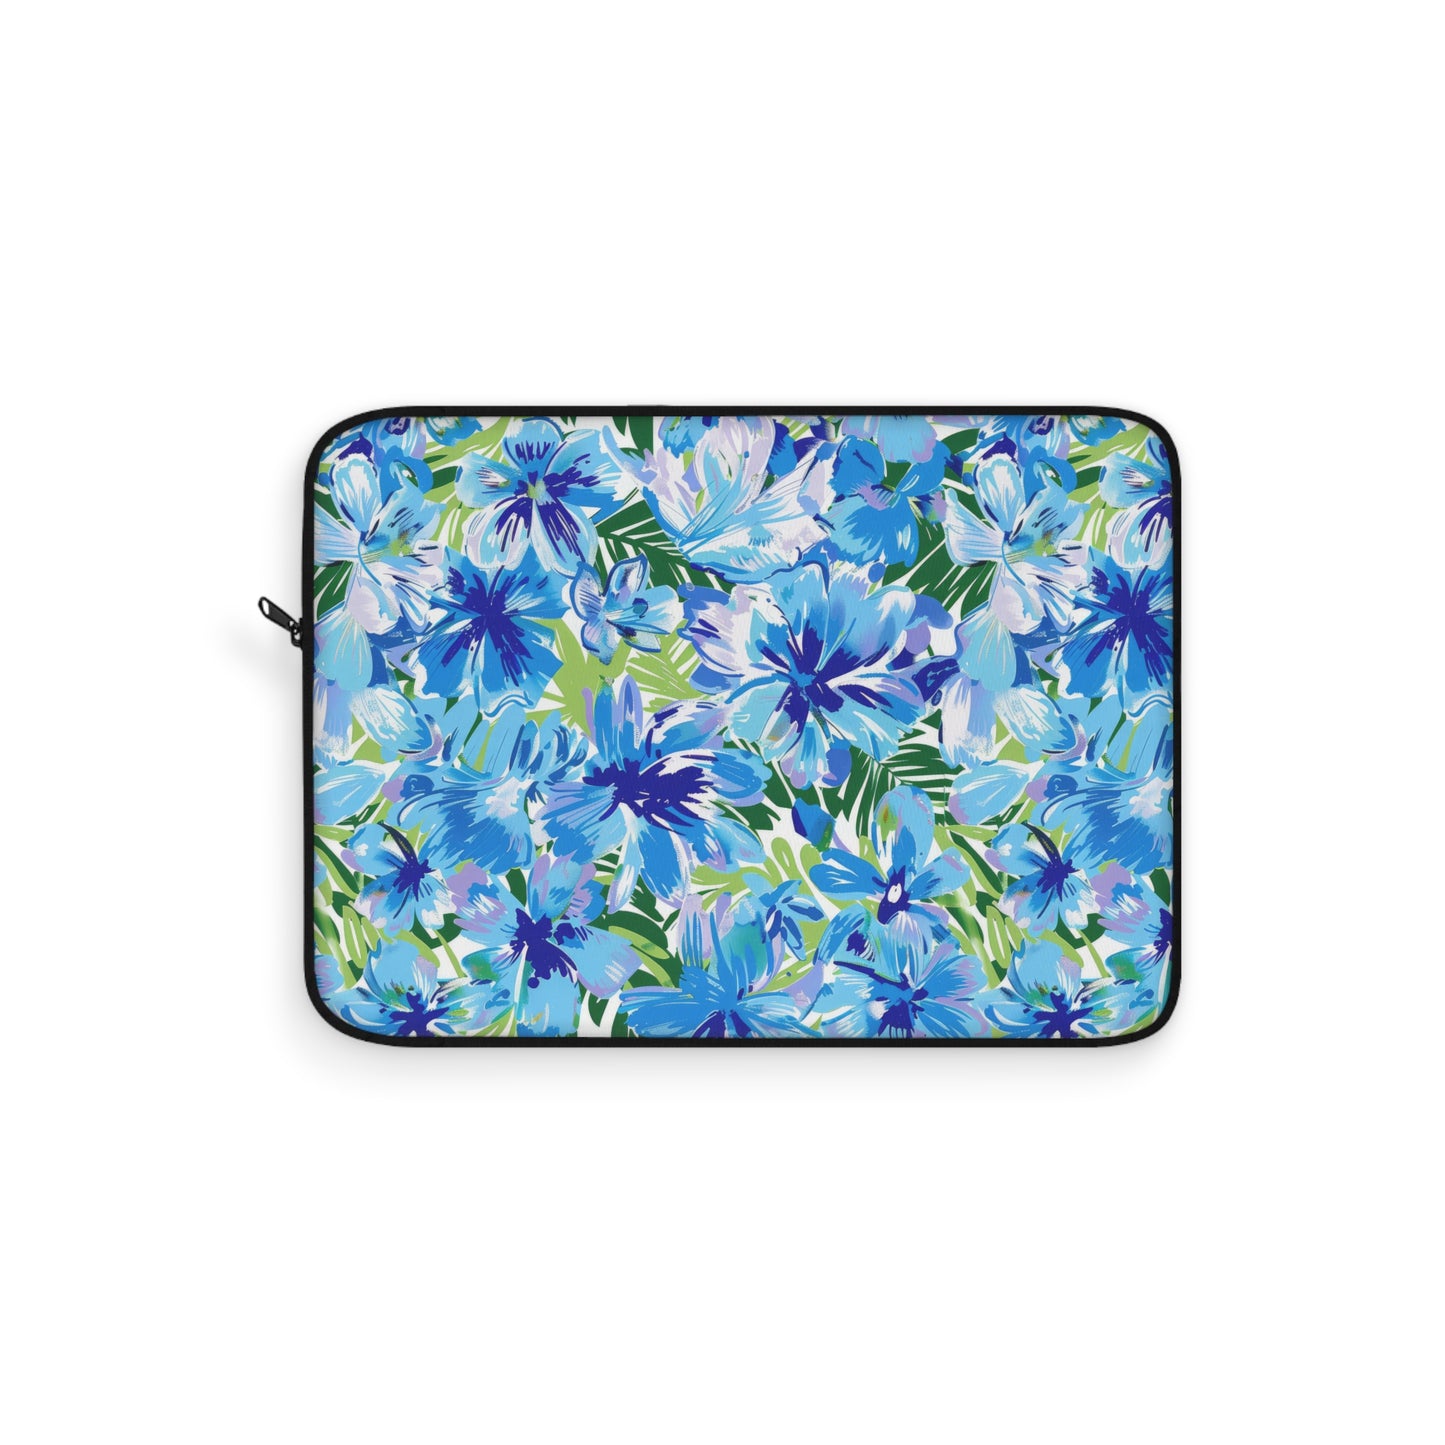 Azure Bloom Oasis: Bright Blue Large Flowers with Lush Green Palm Leaves Laptop or Ipad Protective Sleeve Three Sizes Available